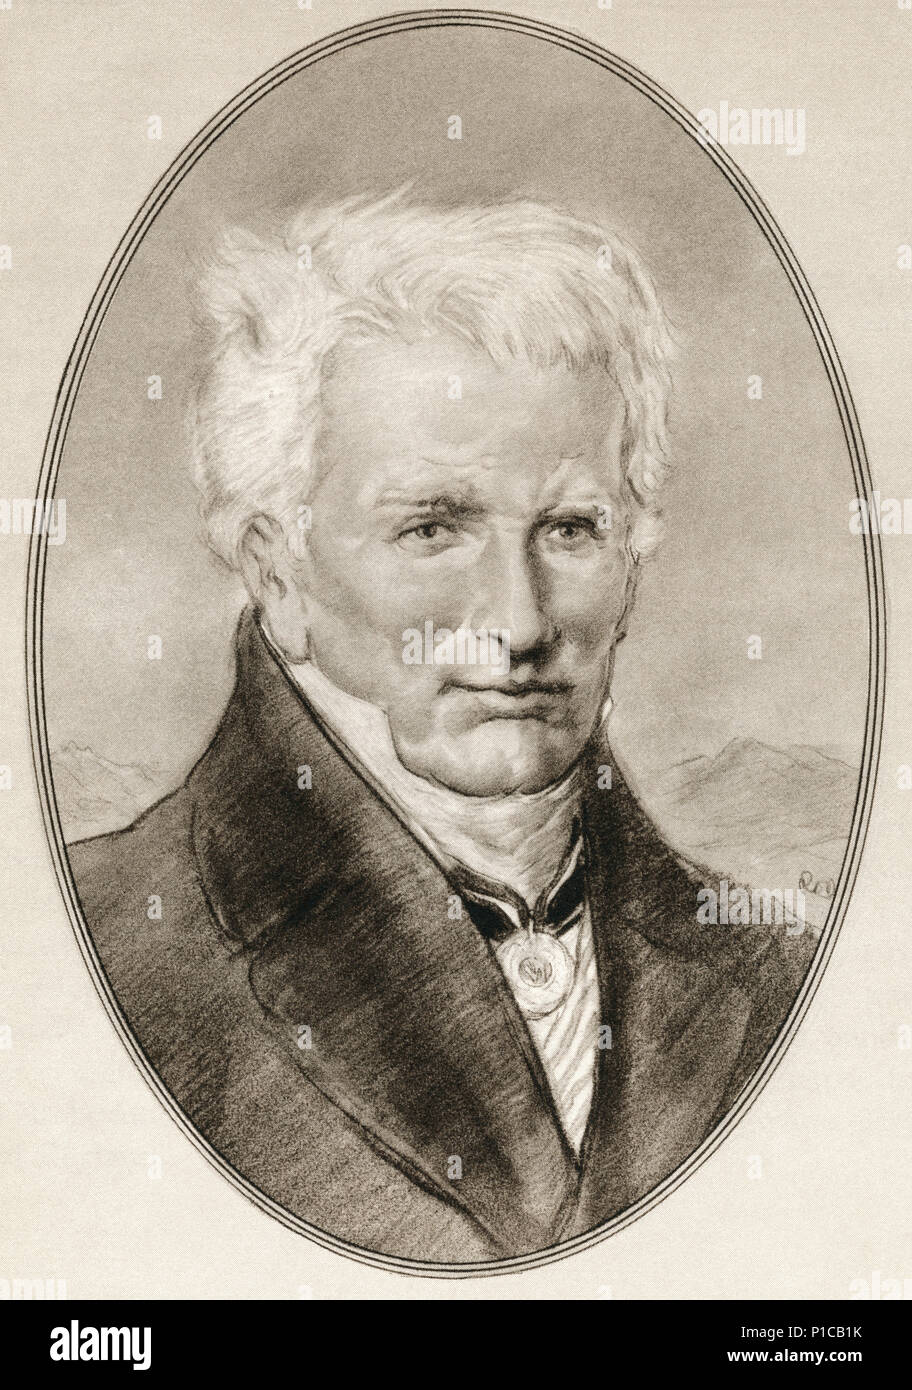 Friedrich Wilhelm Heinrich Alexander von Humboldt, 1769 – 1859.  Prussian polymath, geographer, naturalist, explorer, and influential proponent of Romantic philosophy and science.  Illustration by Gordon Ross, American artist and illustrator (1873-1946), from Living Biographies of Famous Men. Stock Photo